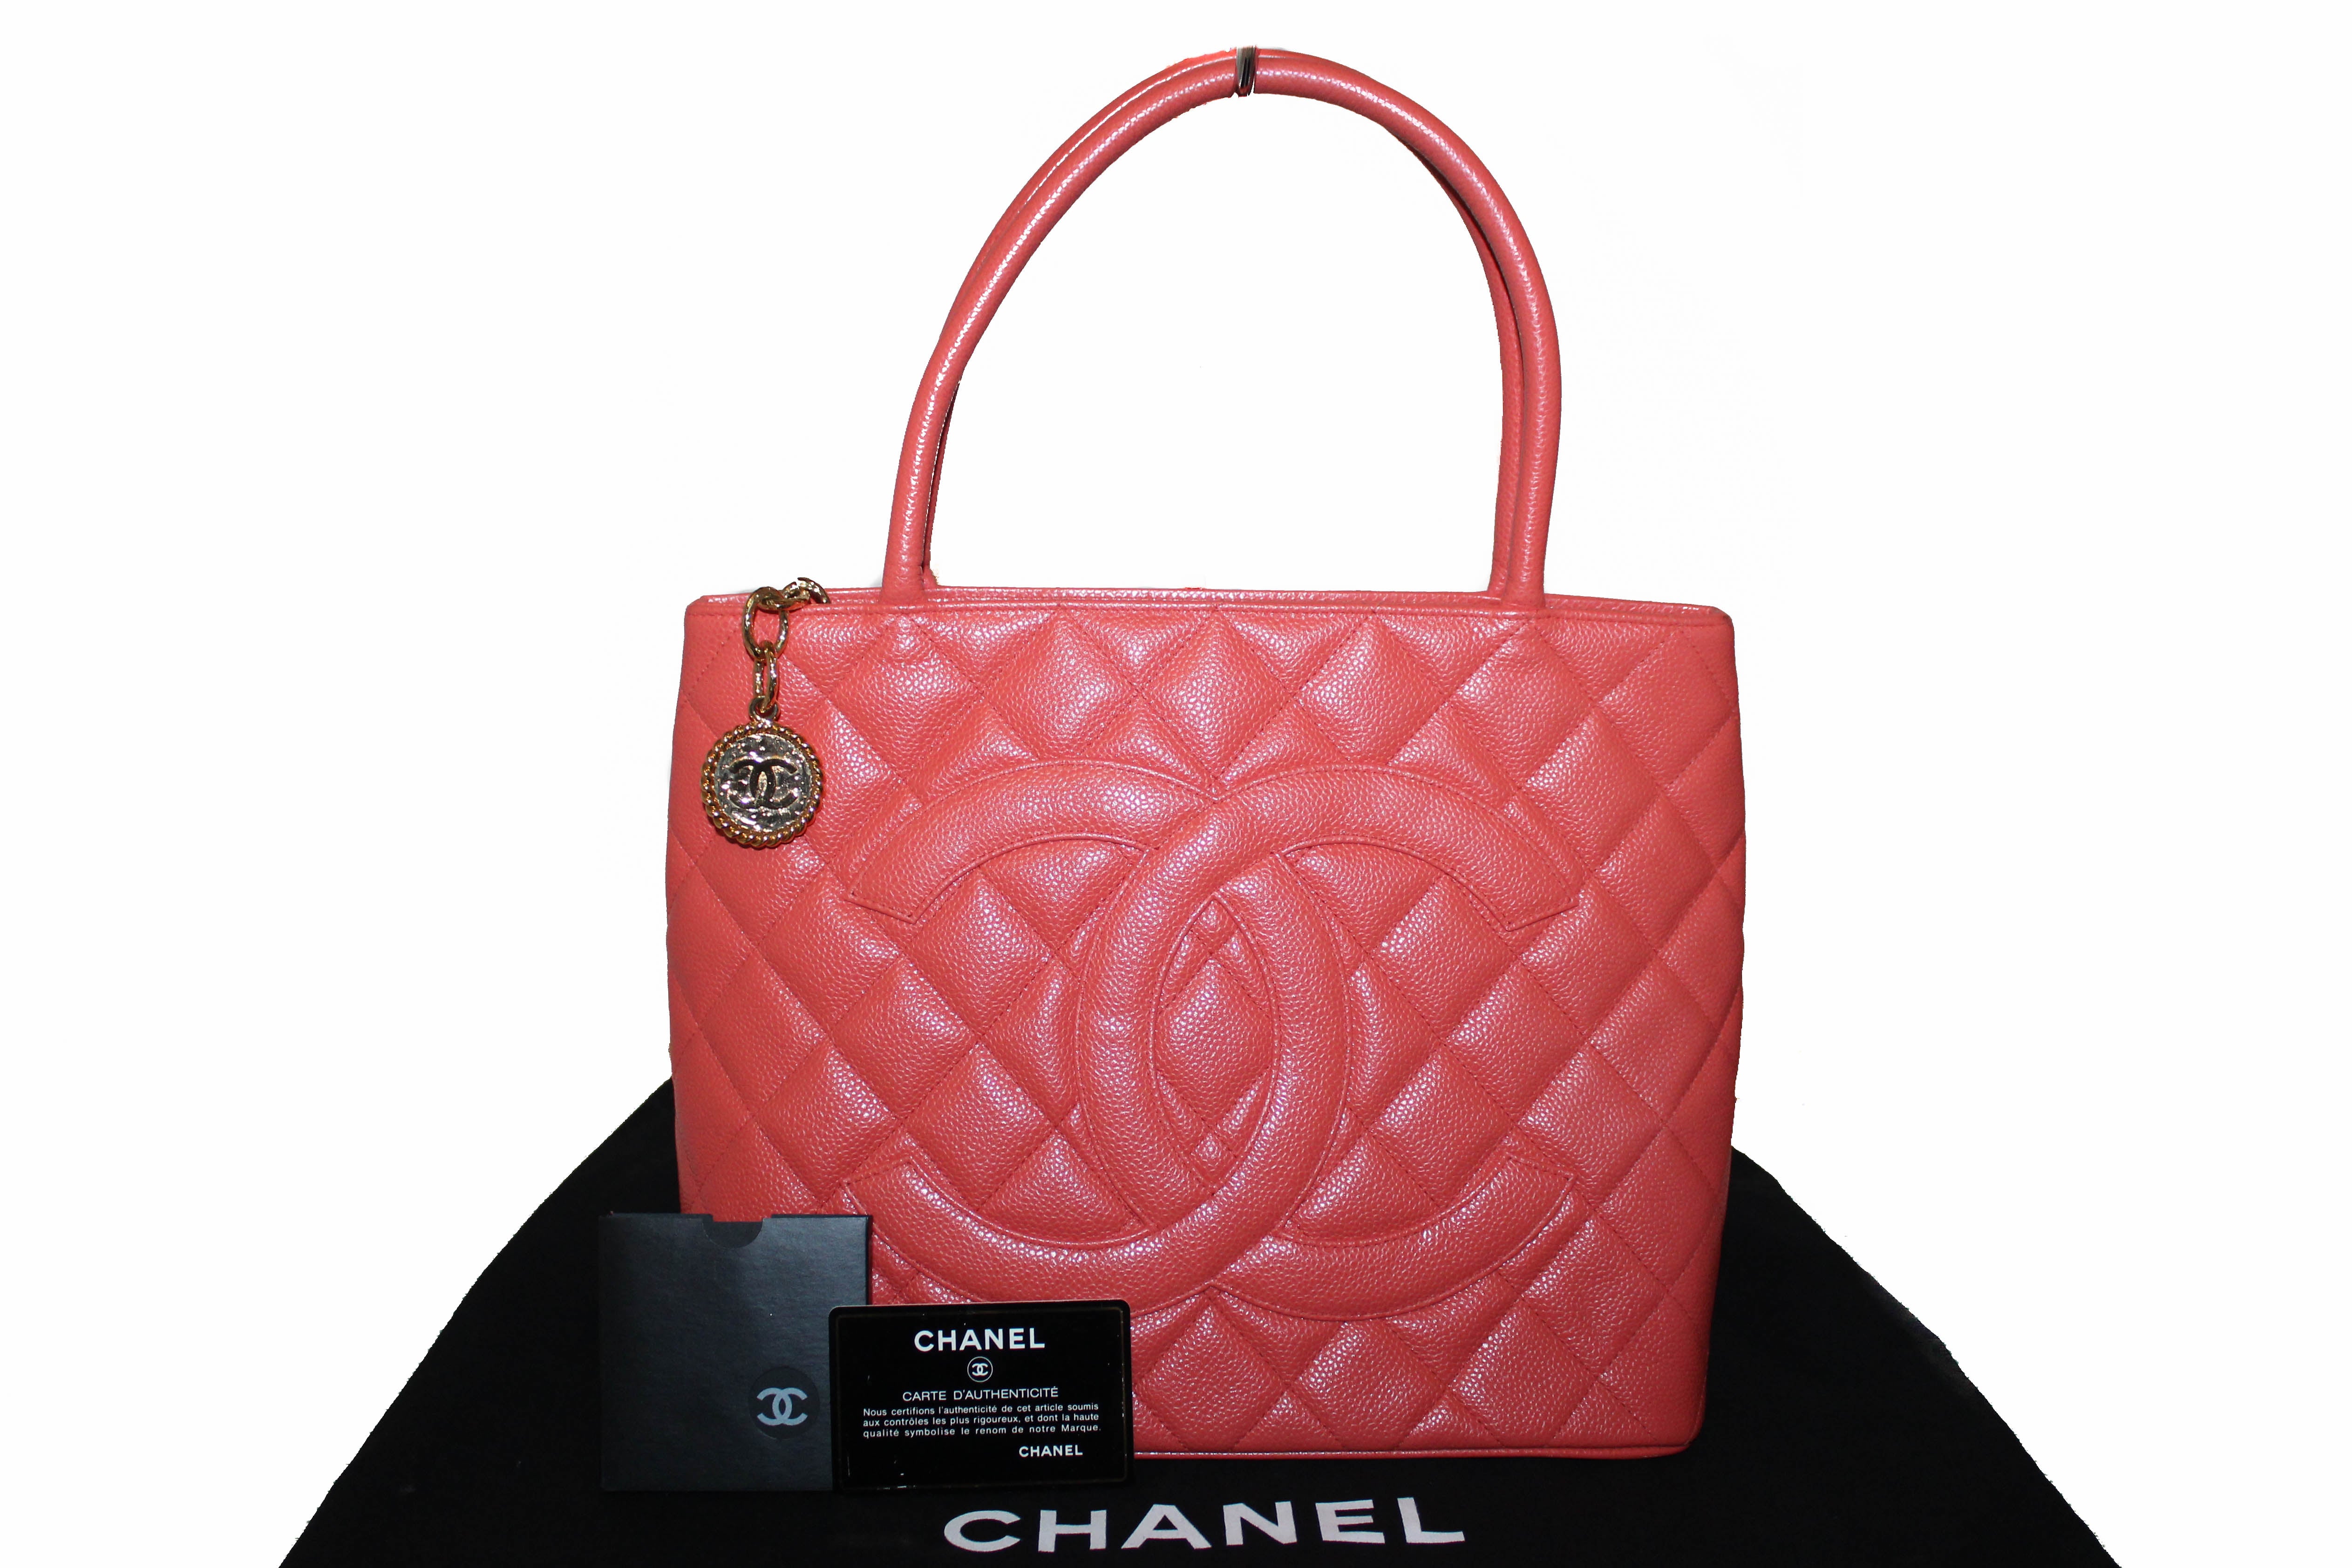 Authentic Chanel Coral Caviar Leather Medallion Tote Shoulder Bag